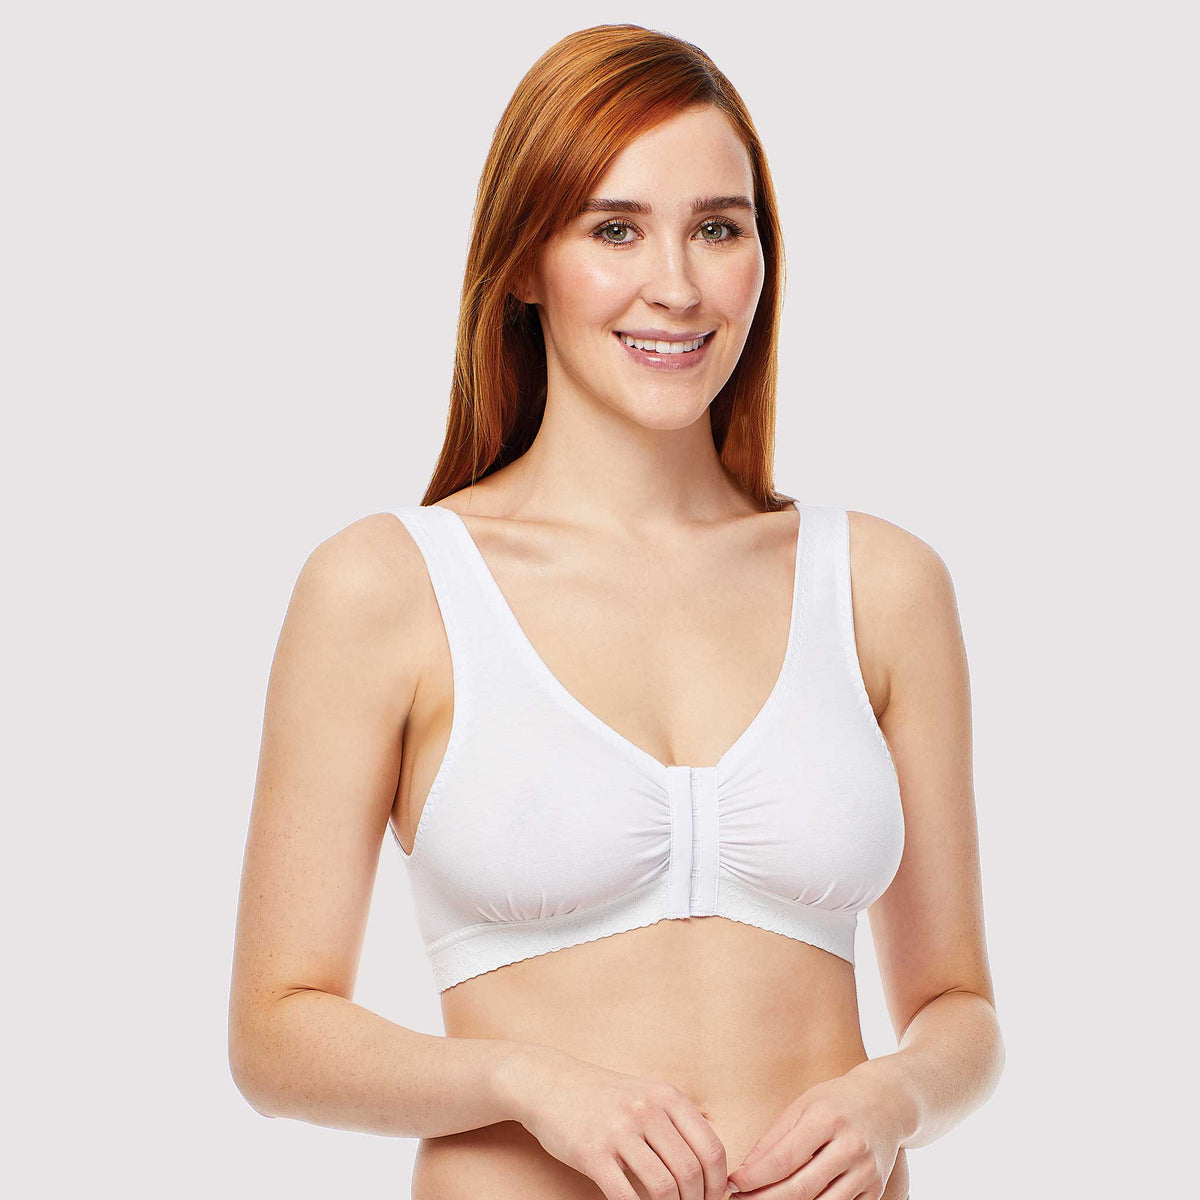 2 Pack Zip-Front Comfort Bras at Cotton Traders